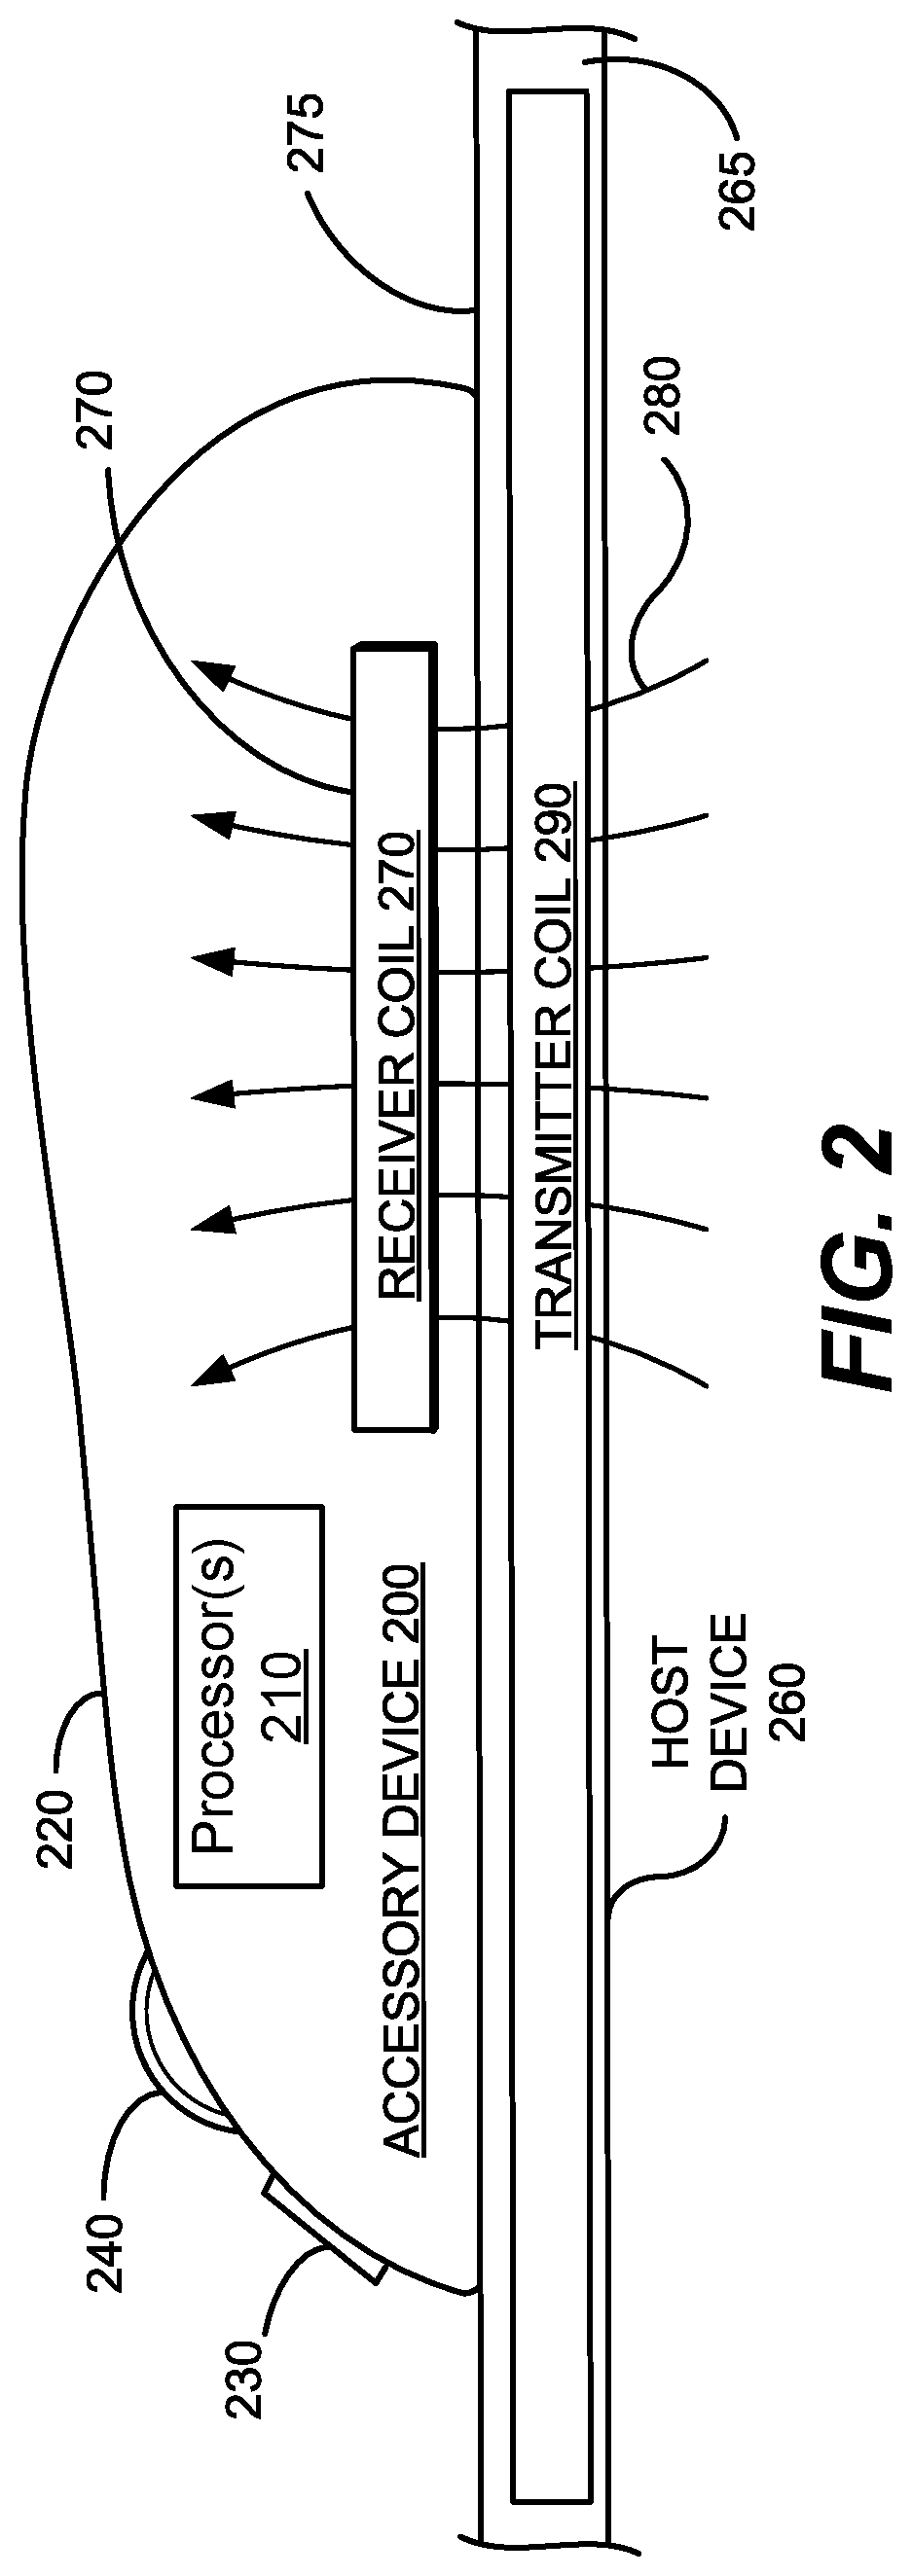 Wireless charging systems and methods for increasing power transfer functions